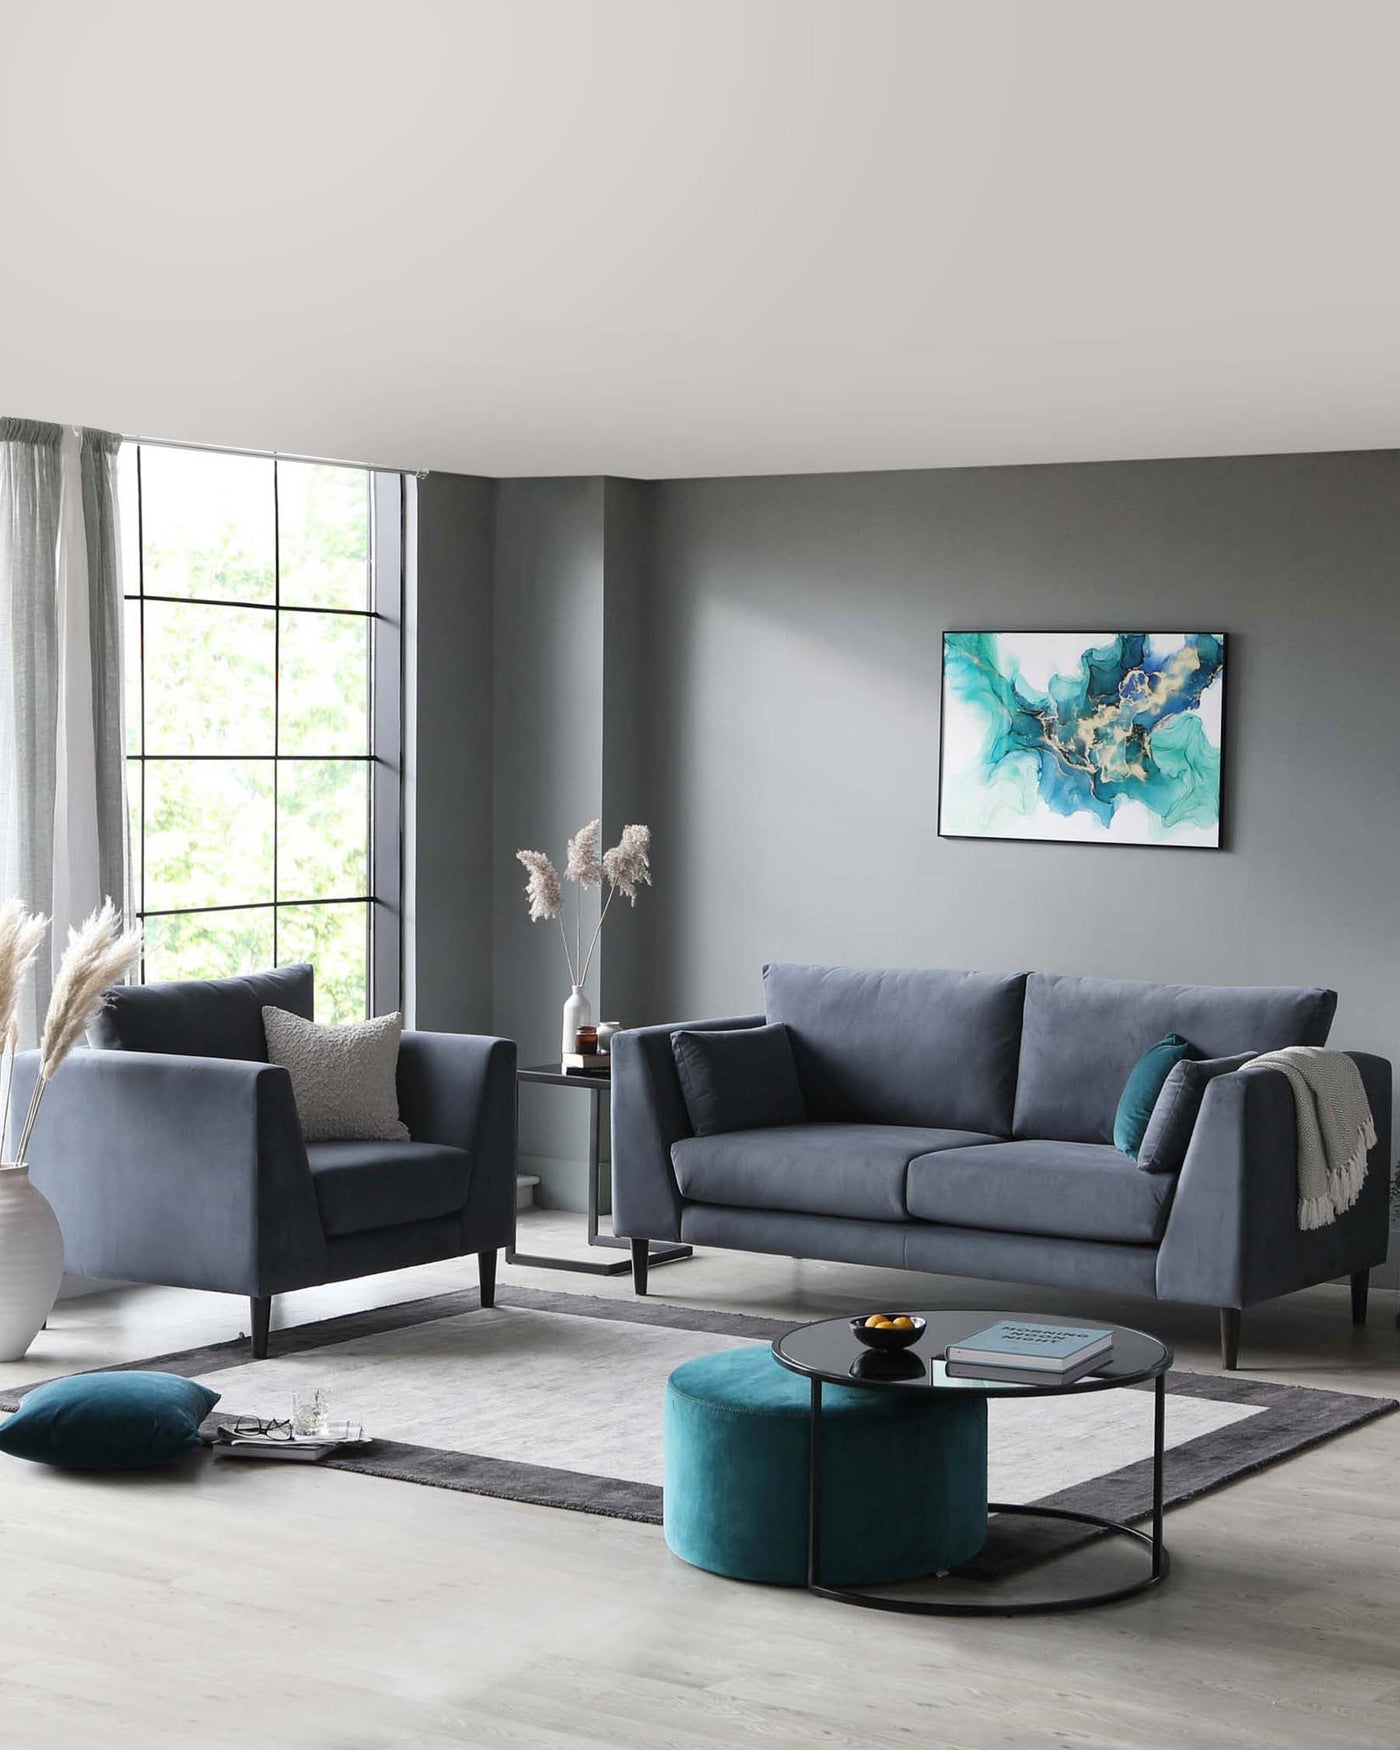 Modern living room set with a dark grey upholstered sofa and two matching armchairs. A round, black metal-framed coffee table with a glass top centres the arrangement, complemented by a teal tufted fabric ottoman. The furniture rests on a light grey area rug over a pale wood floor.